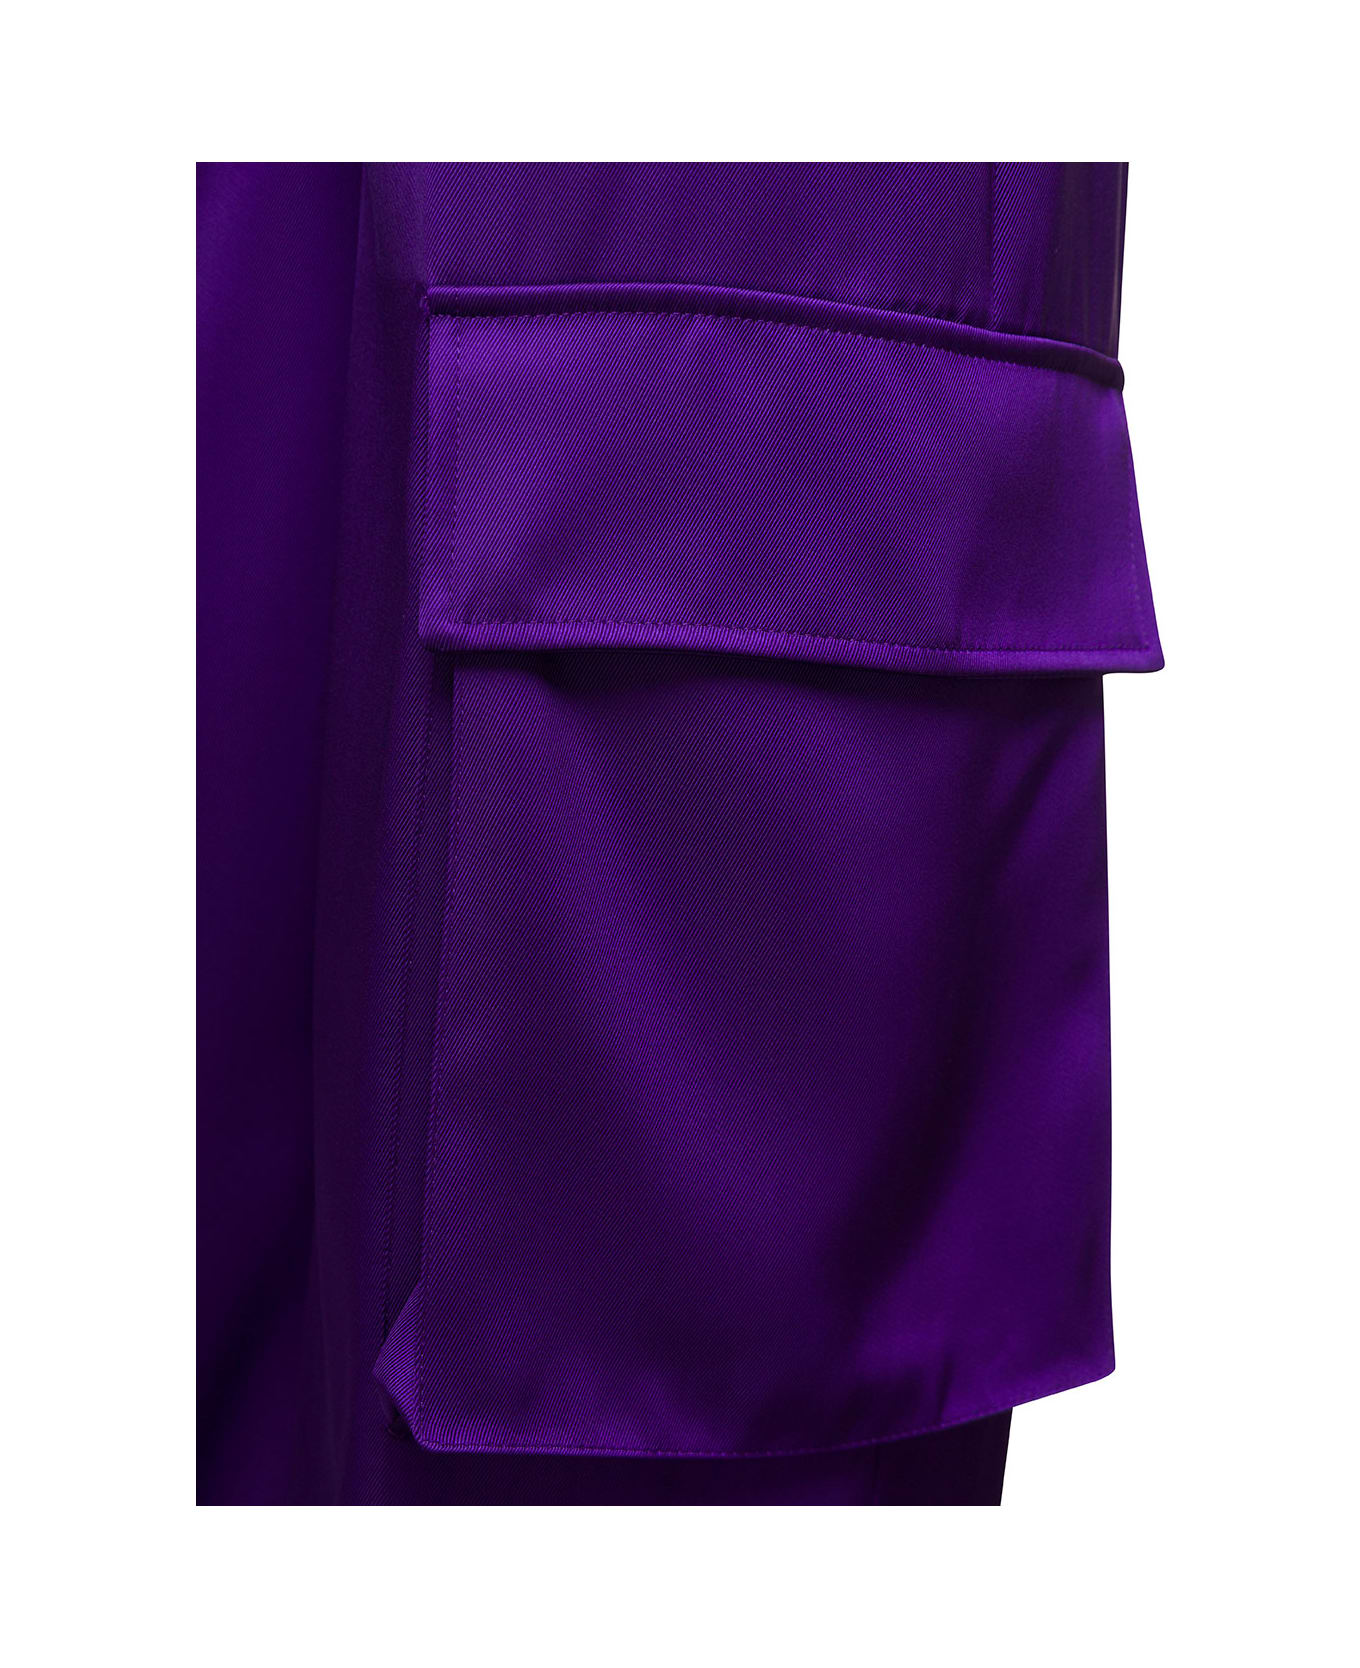 Versace Purple Cargo Pants Satn Effect With Cargo Pockets In Viscose Woman - Violet ボトムス